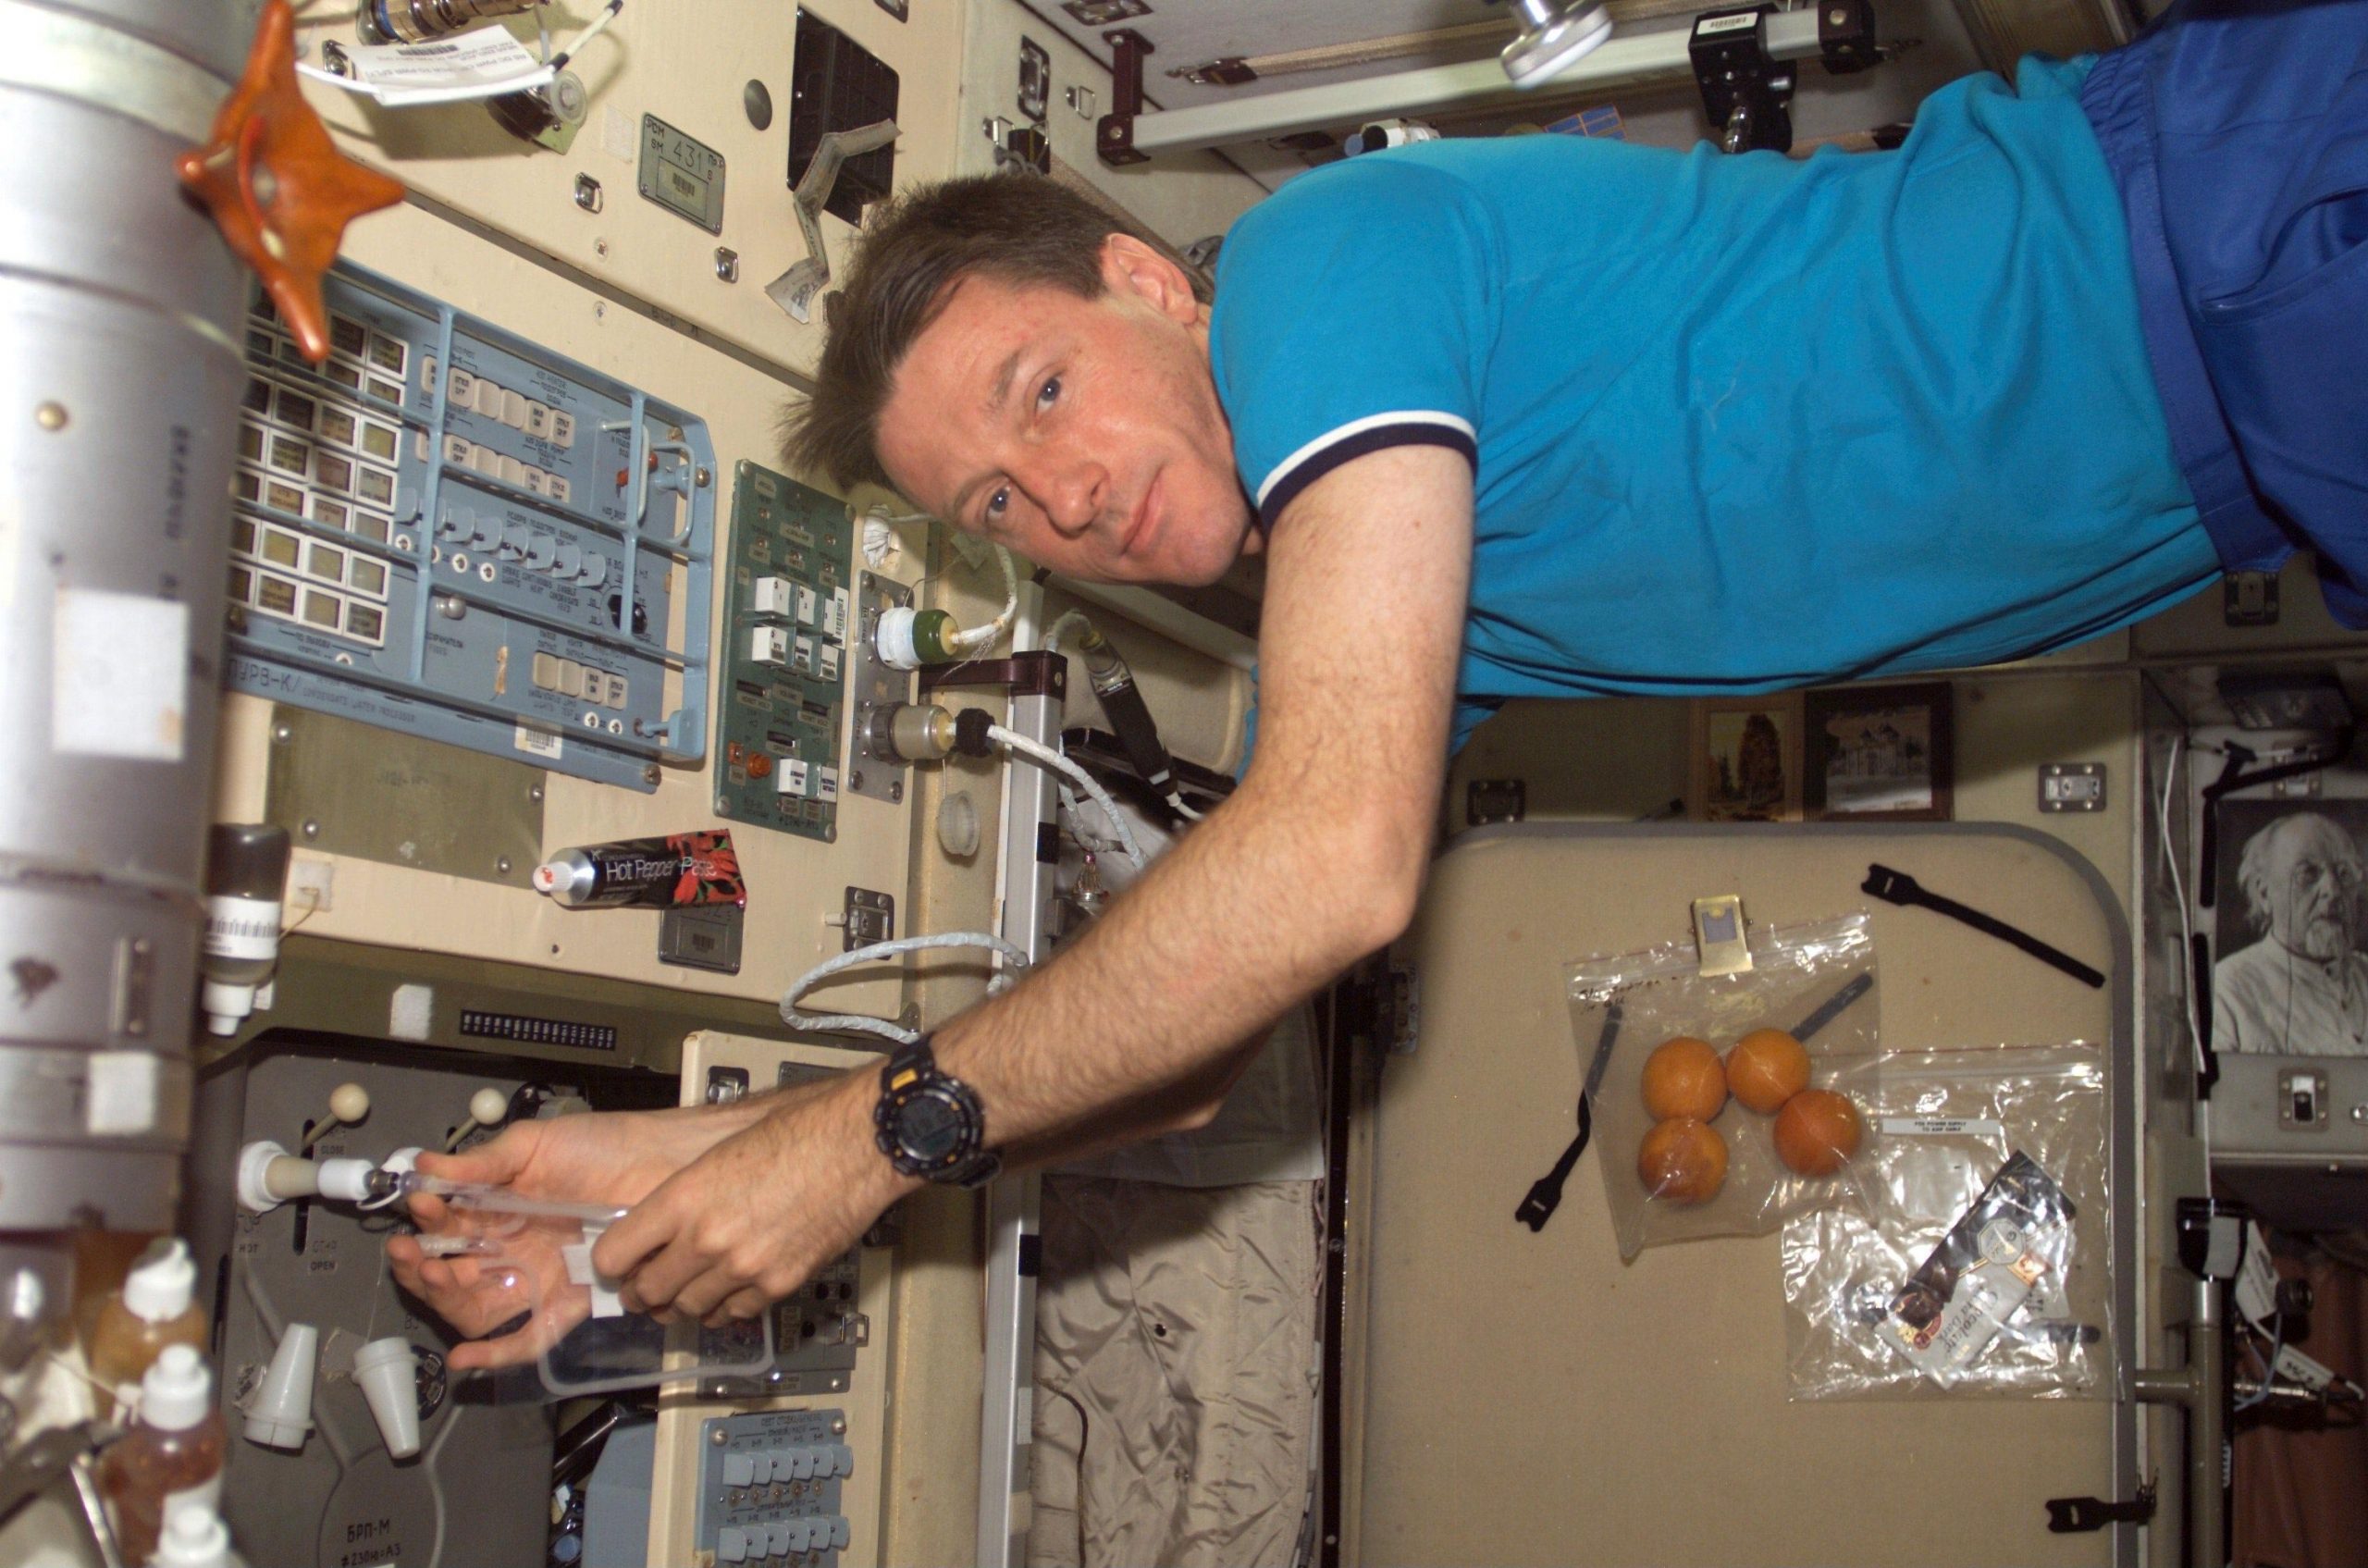  Researchers Analyze Nasty Species of Bacteria That Has Colonized Space Station’s Water Dispenser 